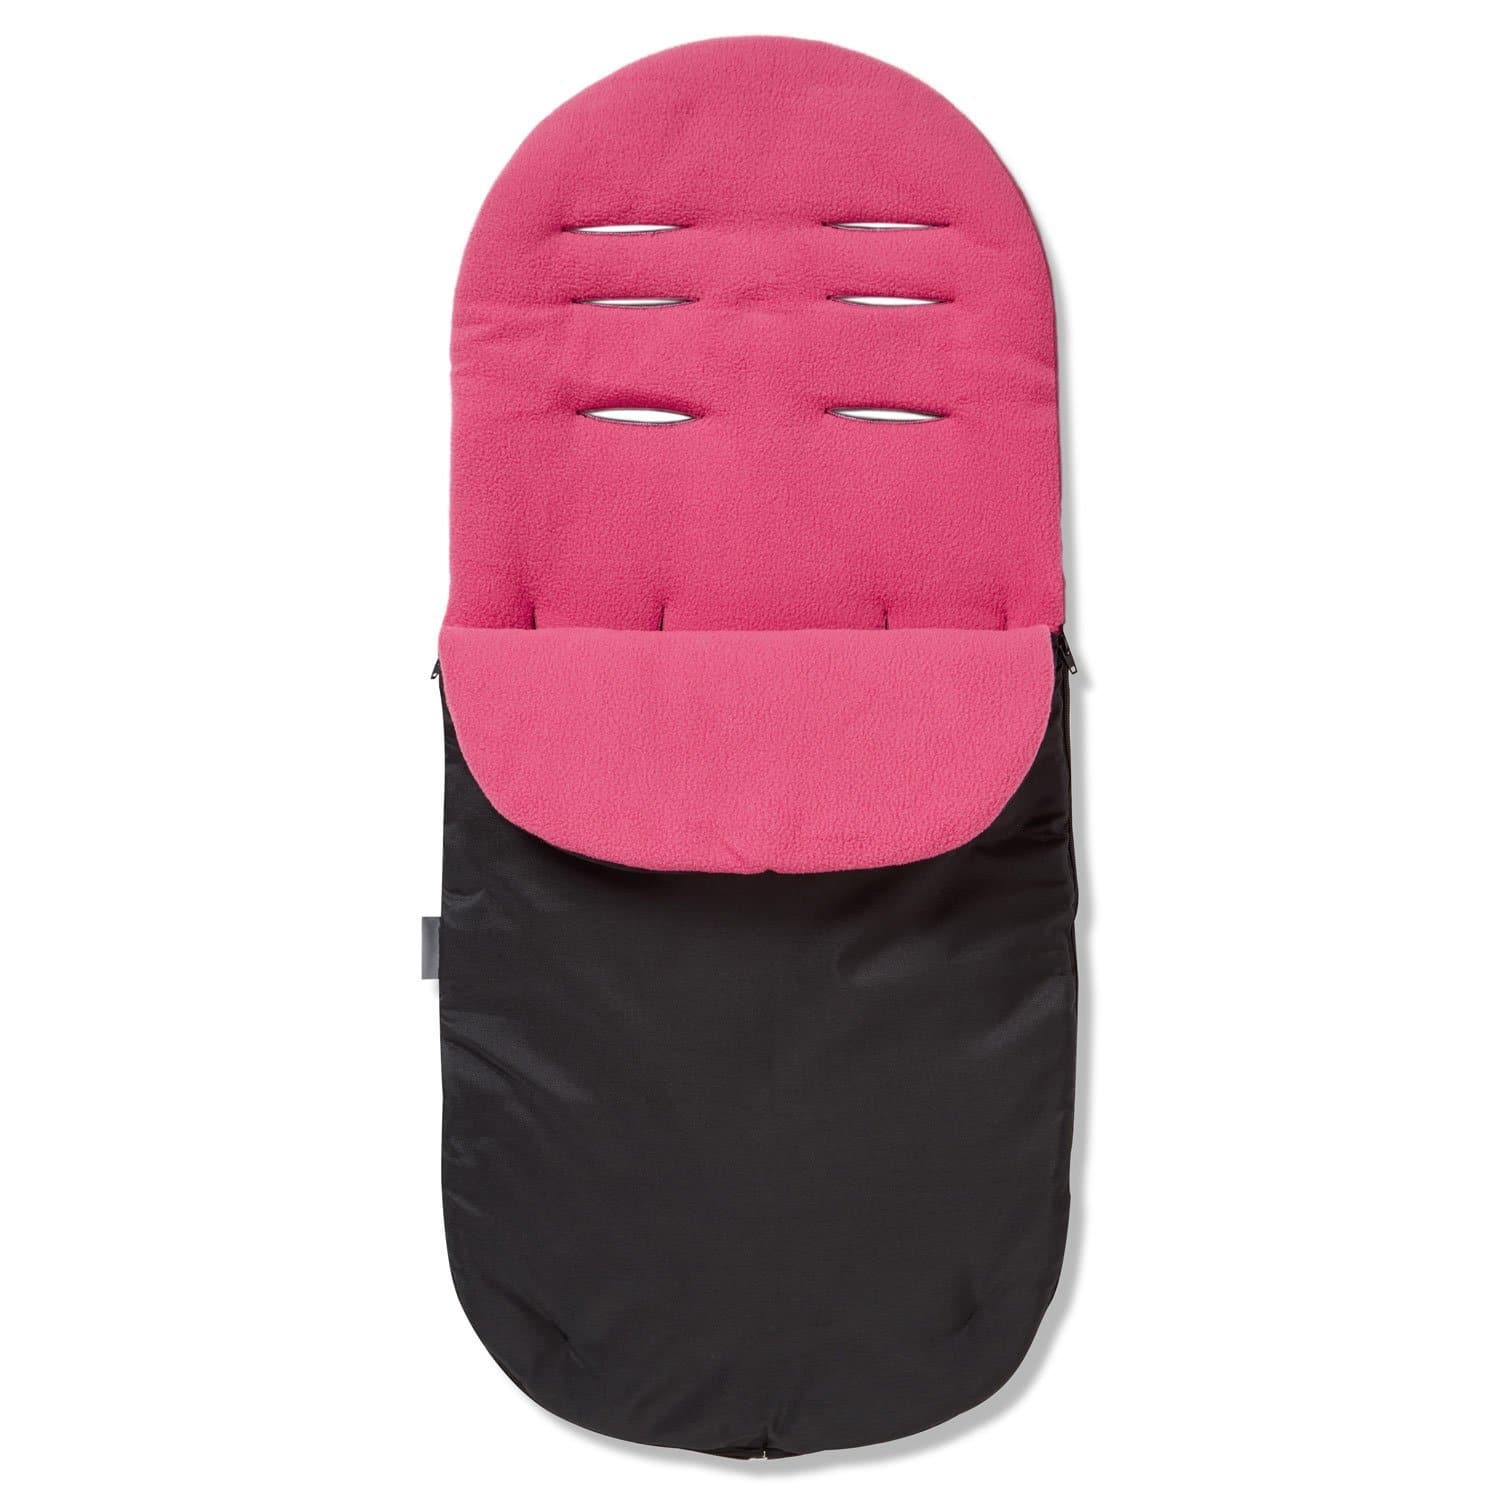 Footmuff / Cosy Toes Compatible with iCandy - Dark Pink / Fits All Models | For Your Little One